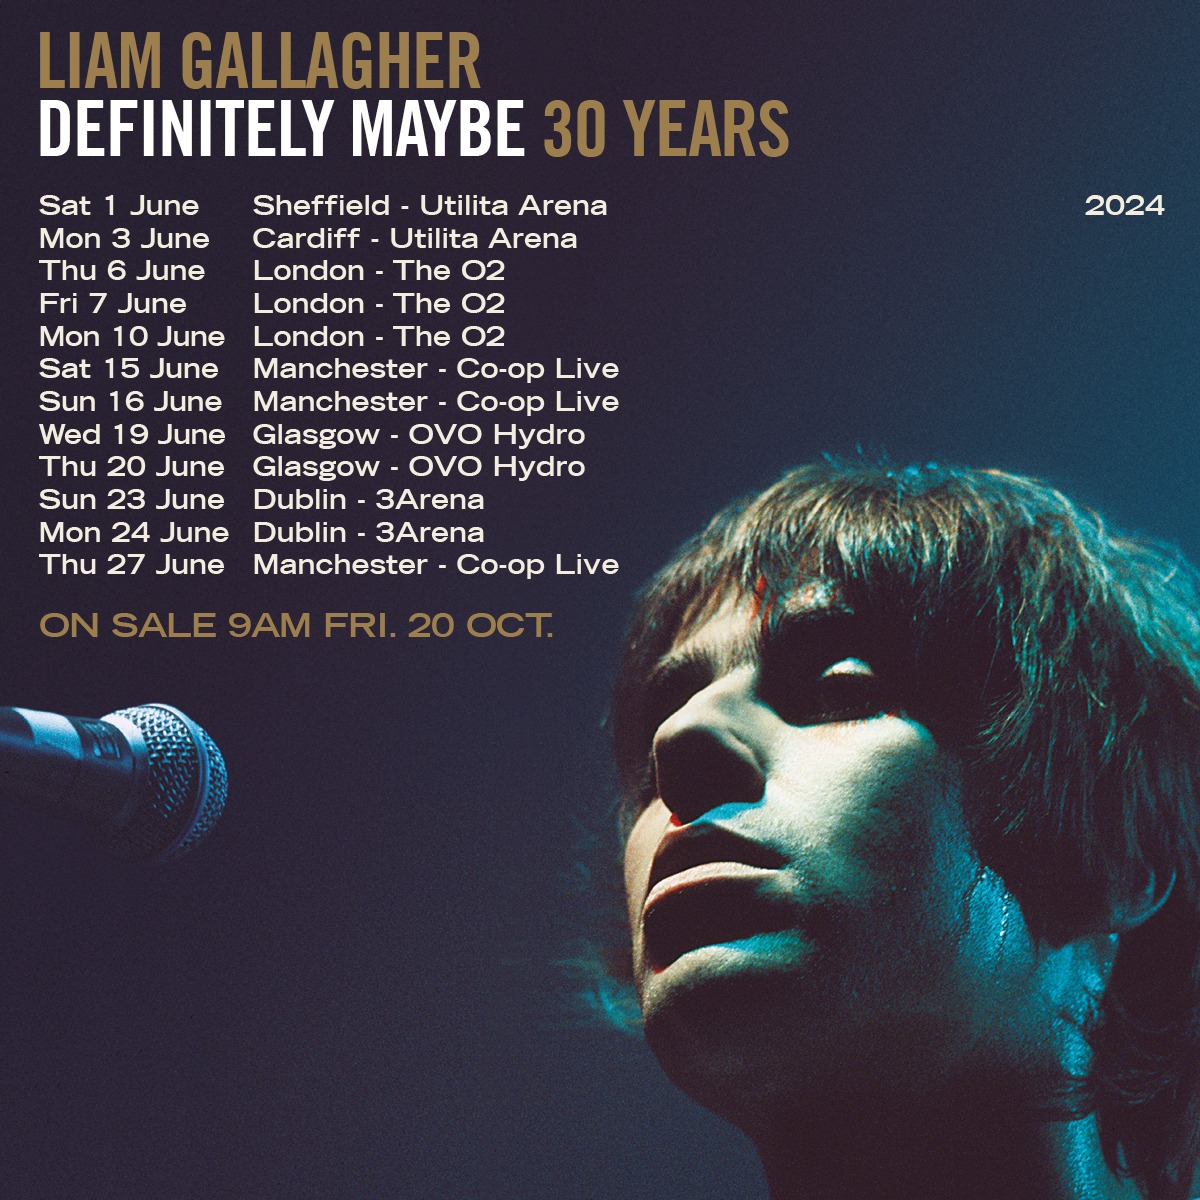 Liam Gallagher - Definitely Maybe 30 Years at 3Arena Dublin Tickets